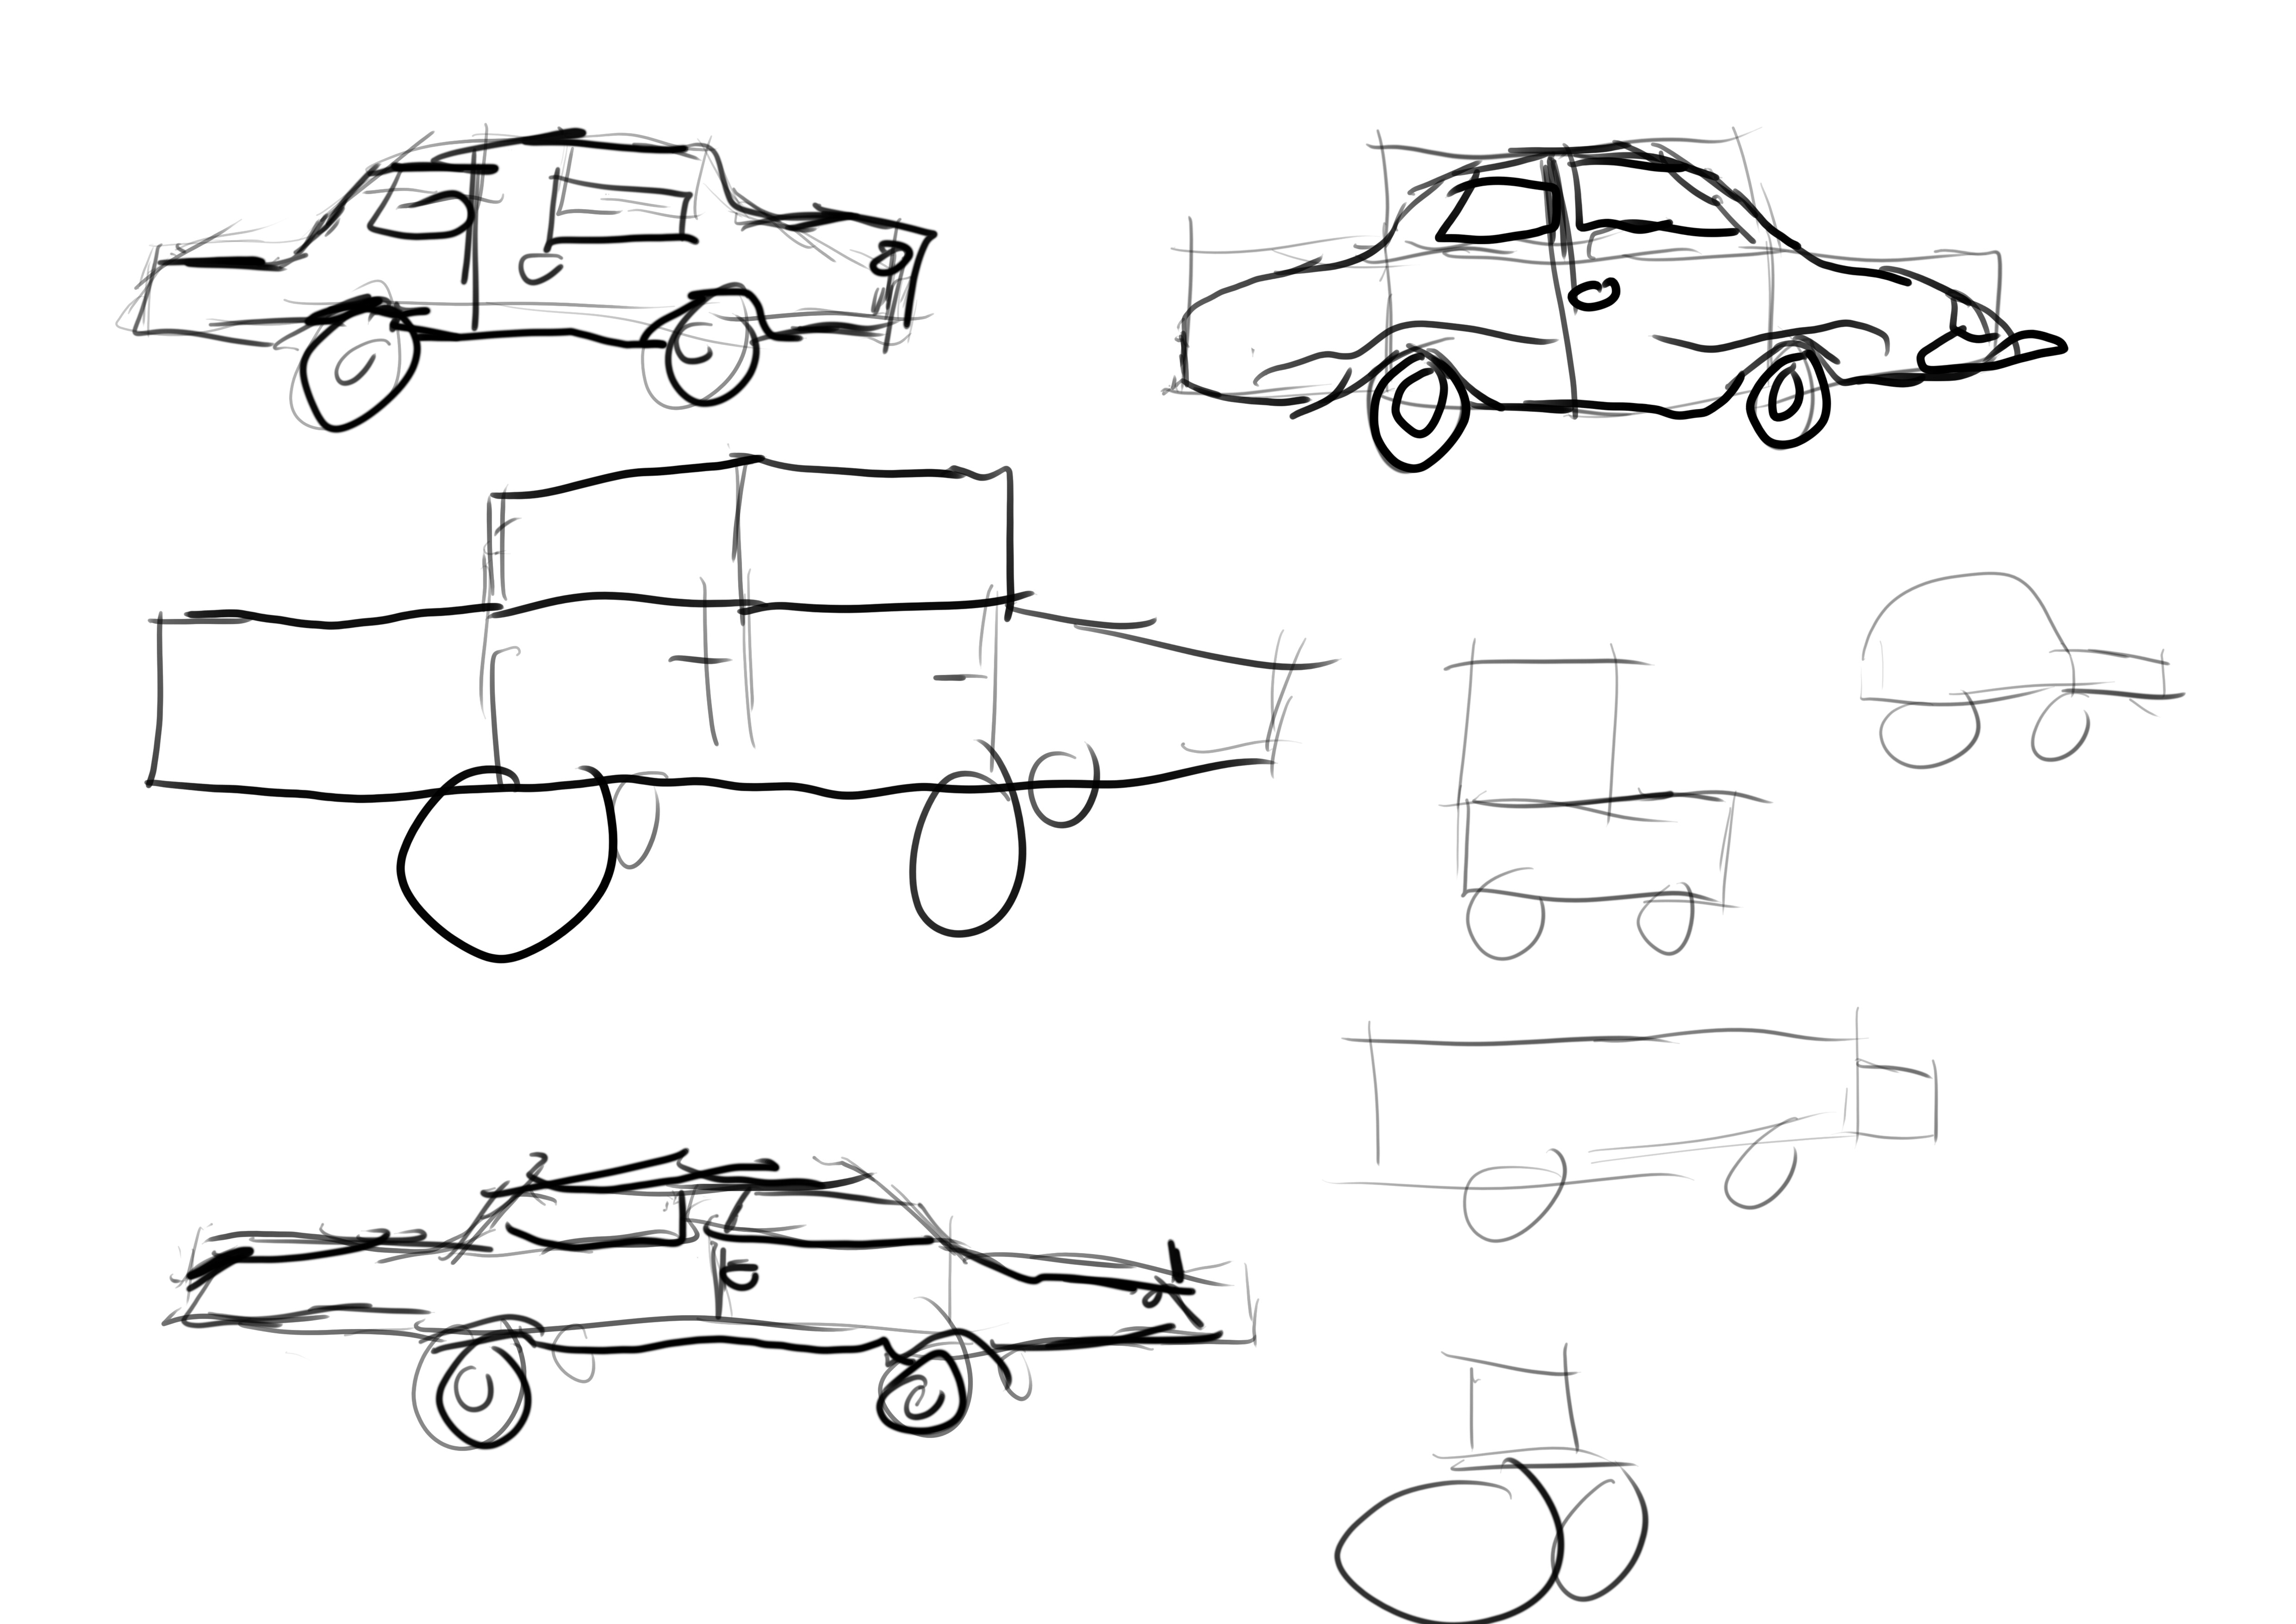 How to Draw Dinoco car step by step - [12 Easy Phase]